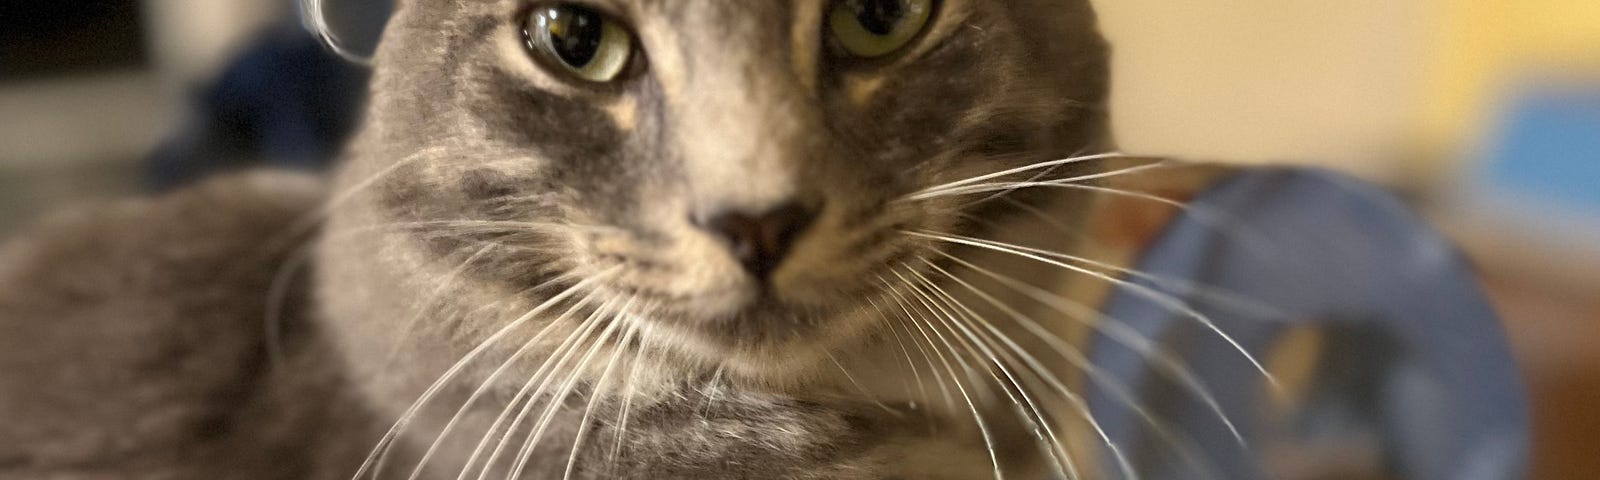 gray tabby cat with long whiskers and ear tufts staring at camera.